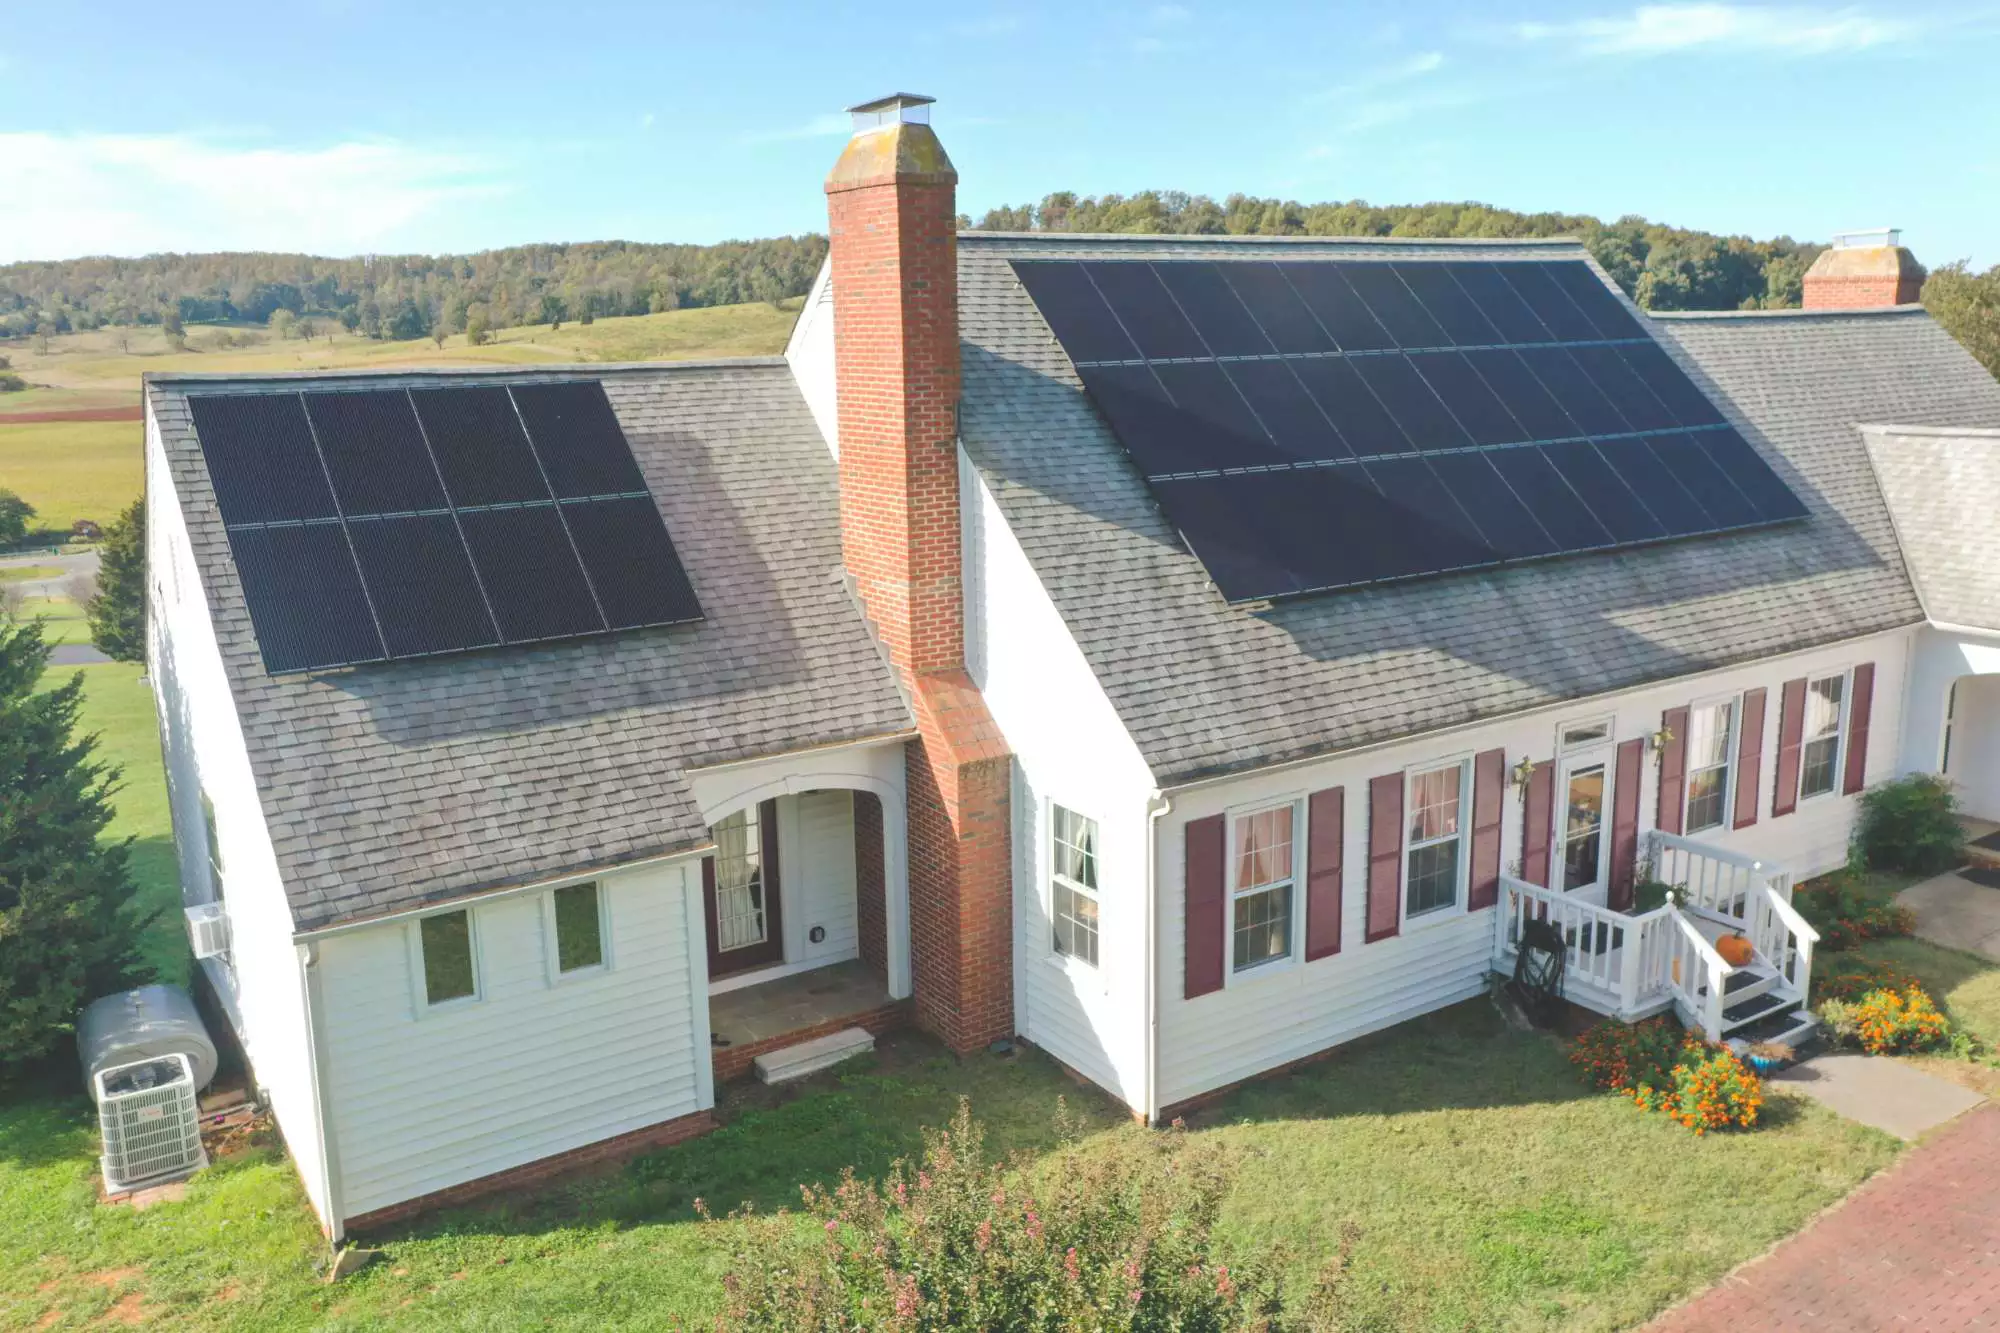 Roof mounted solar panels